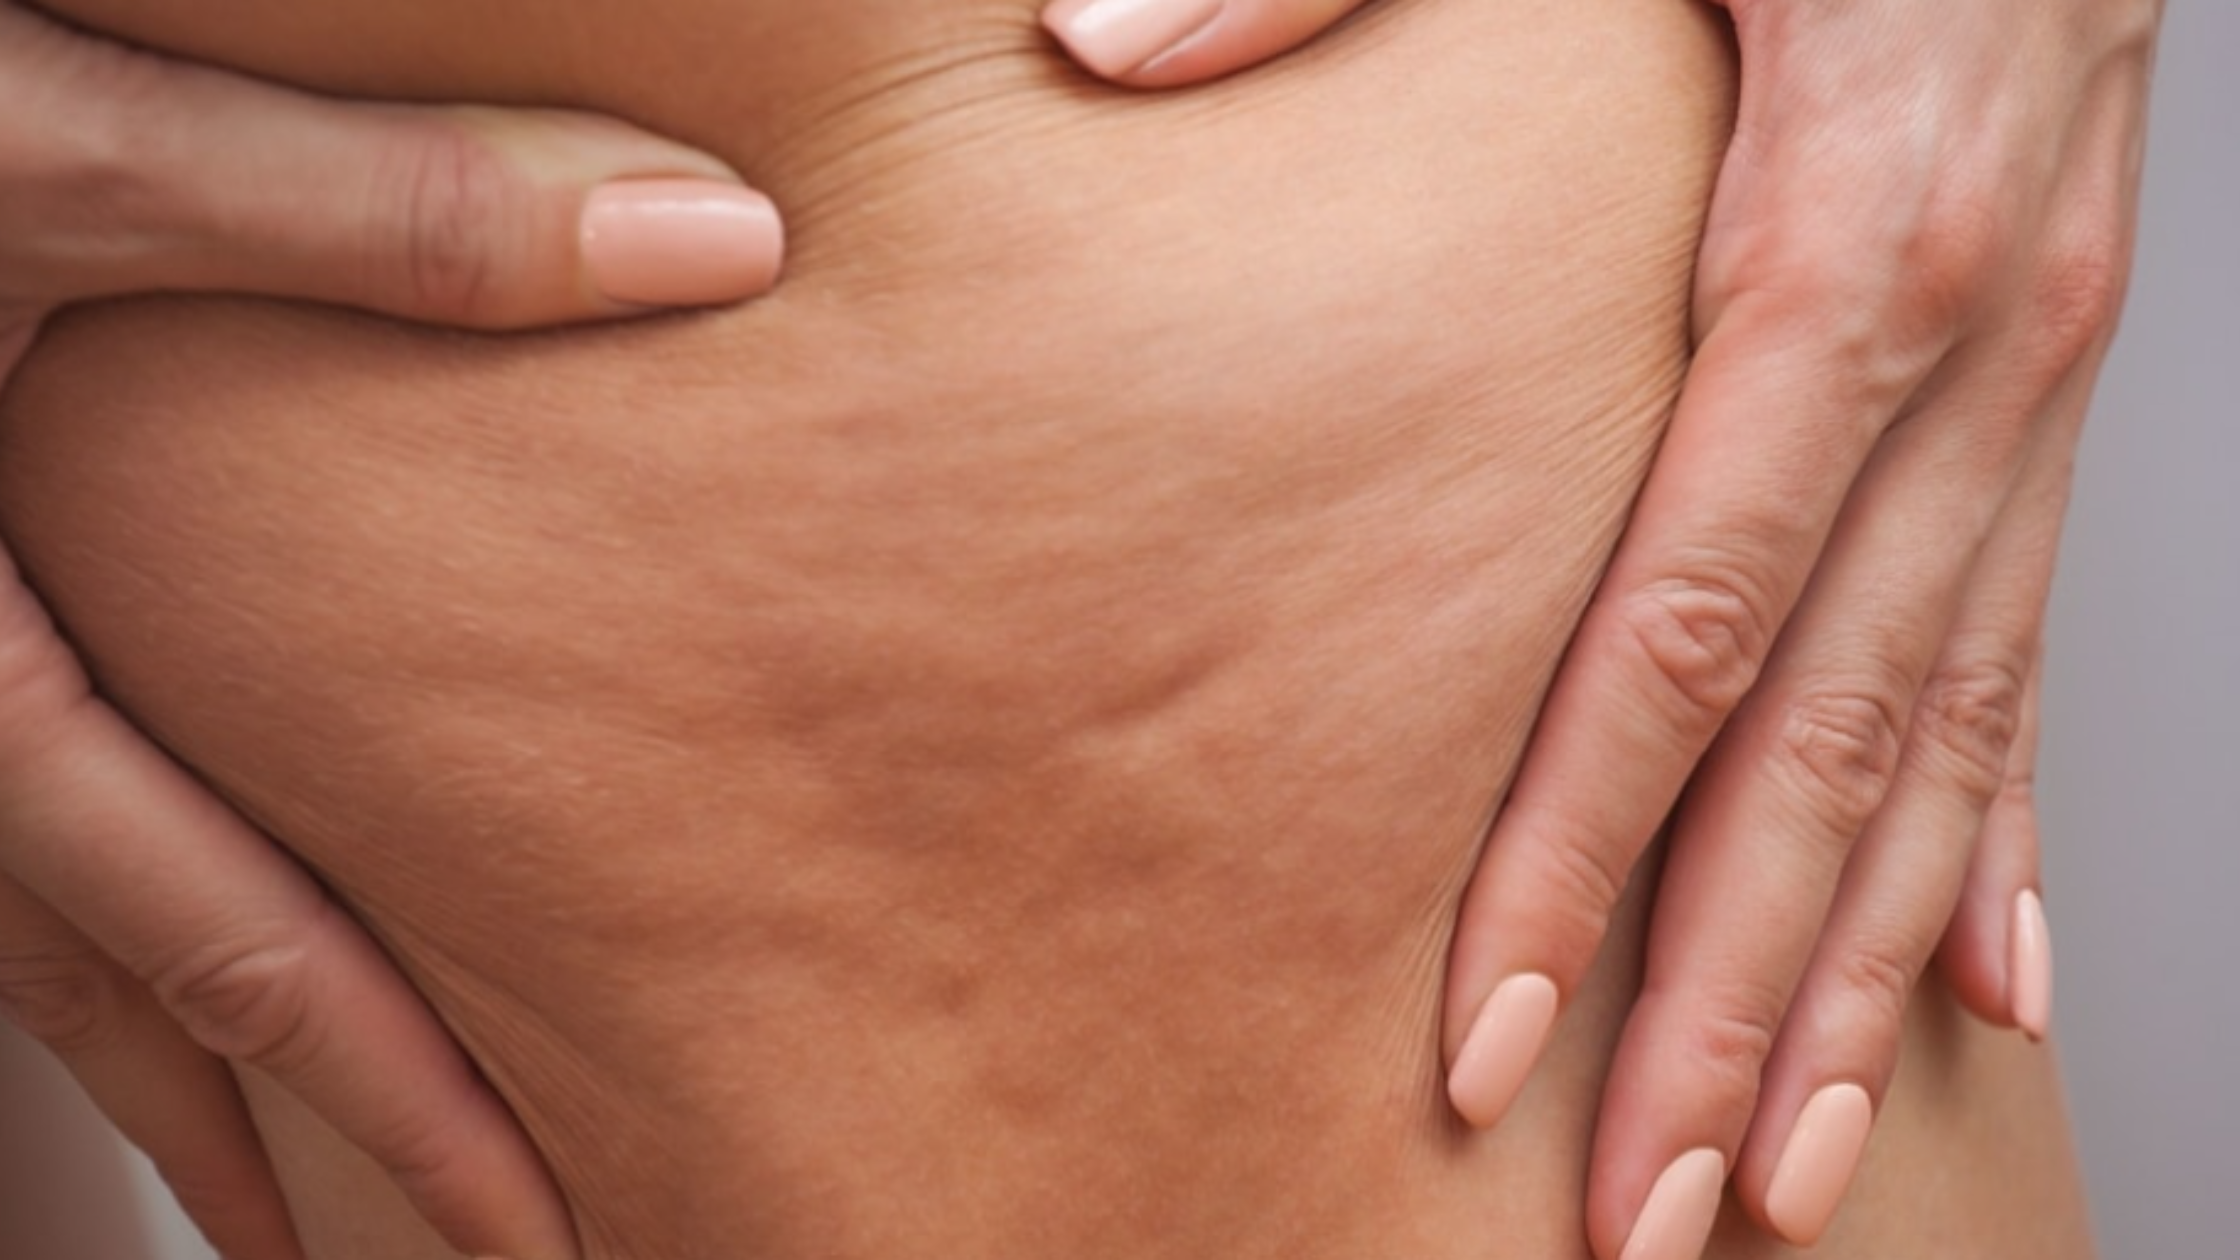 How to tackle cellulite